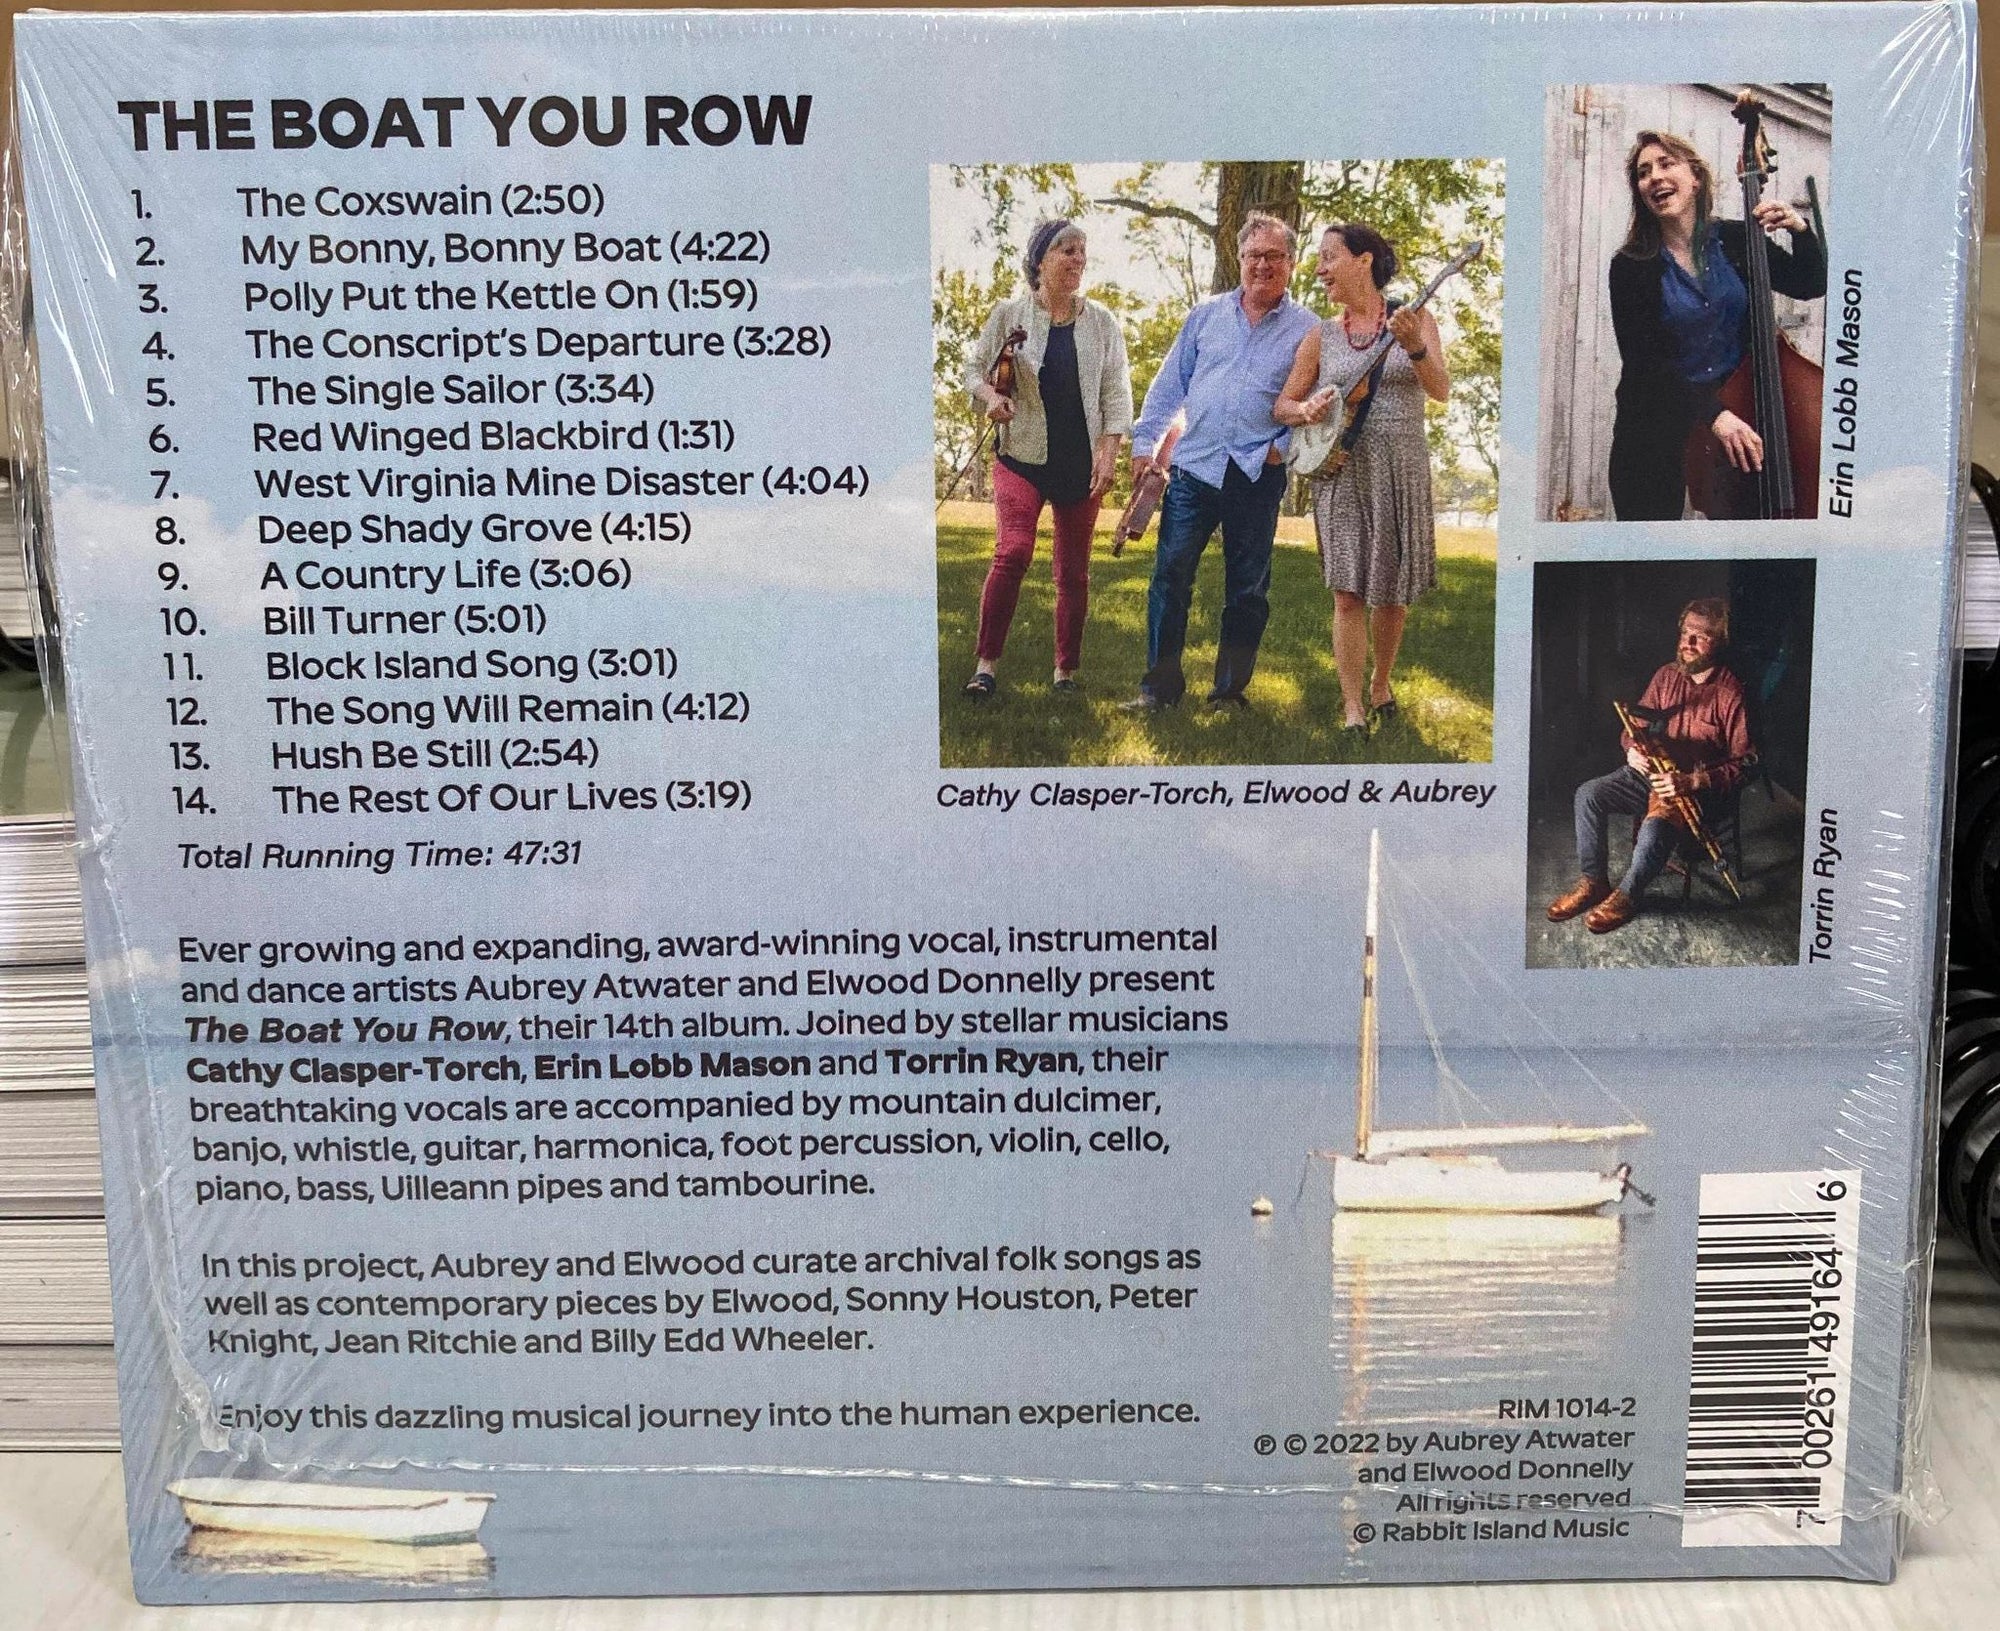 Back cover of the The Boat You Row by Aubrey Atwater CD, showing tracklist, credits, and images of the band members laughing and playing instruments.